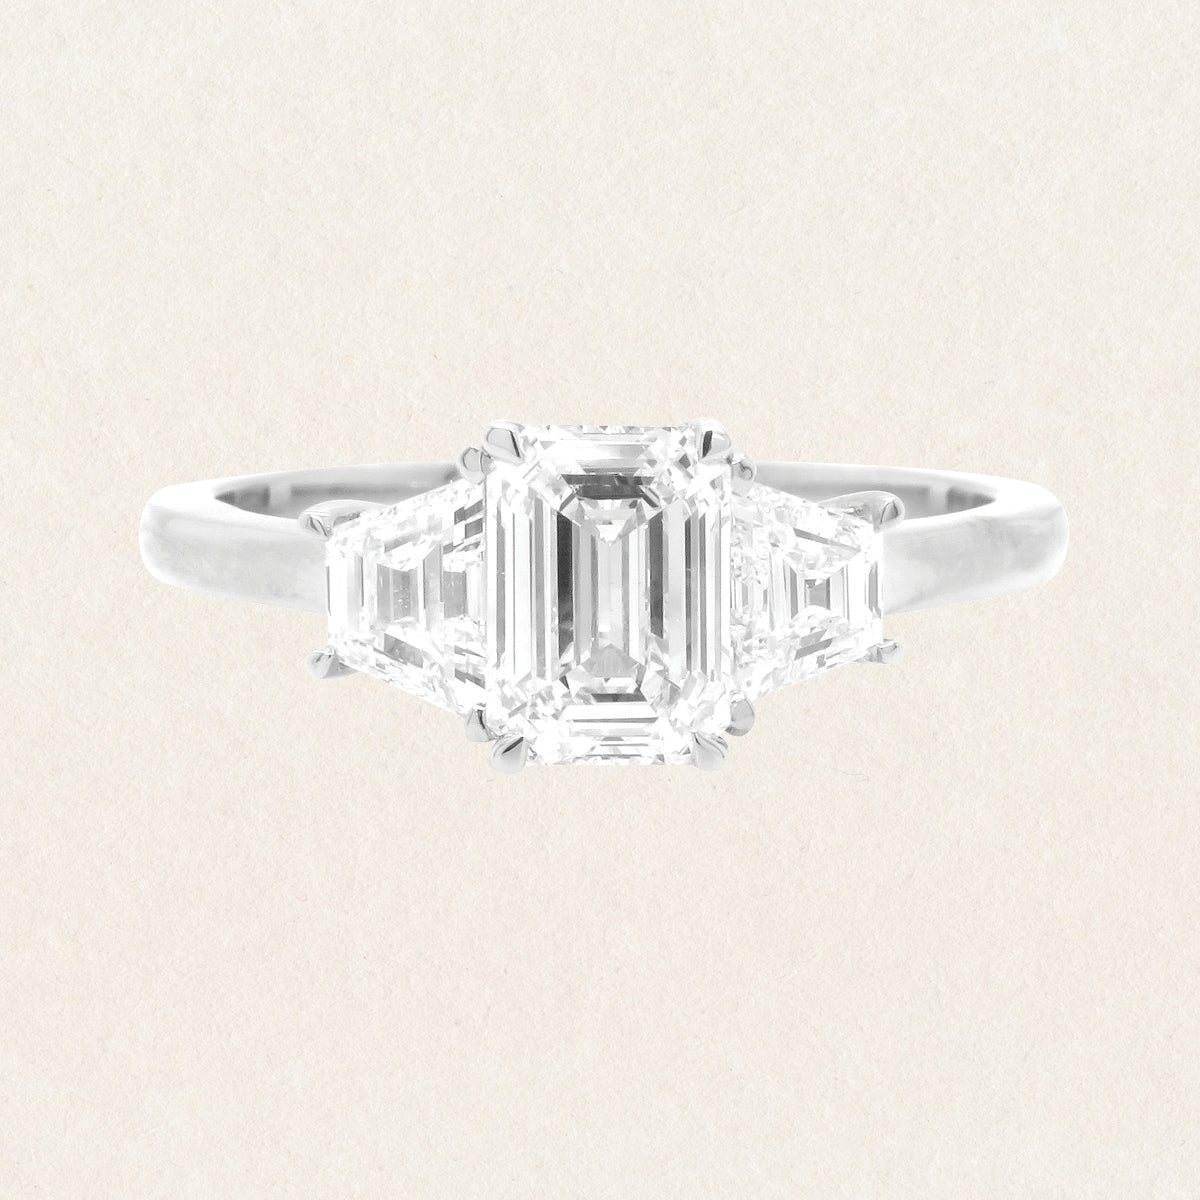 Brilliant emerald cut 0.53ct lab grown diamond trilogy ring made with 18k white gold